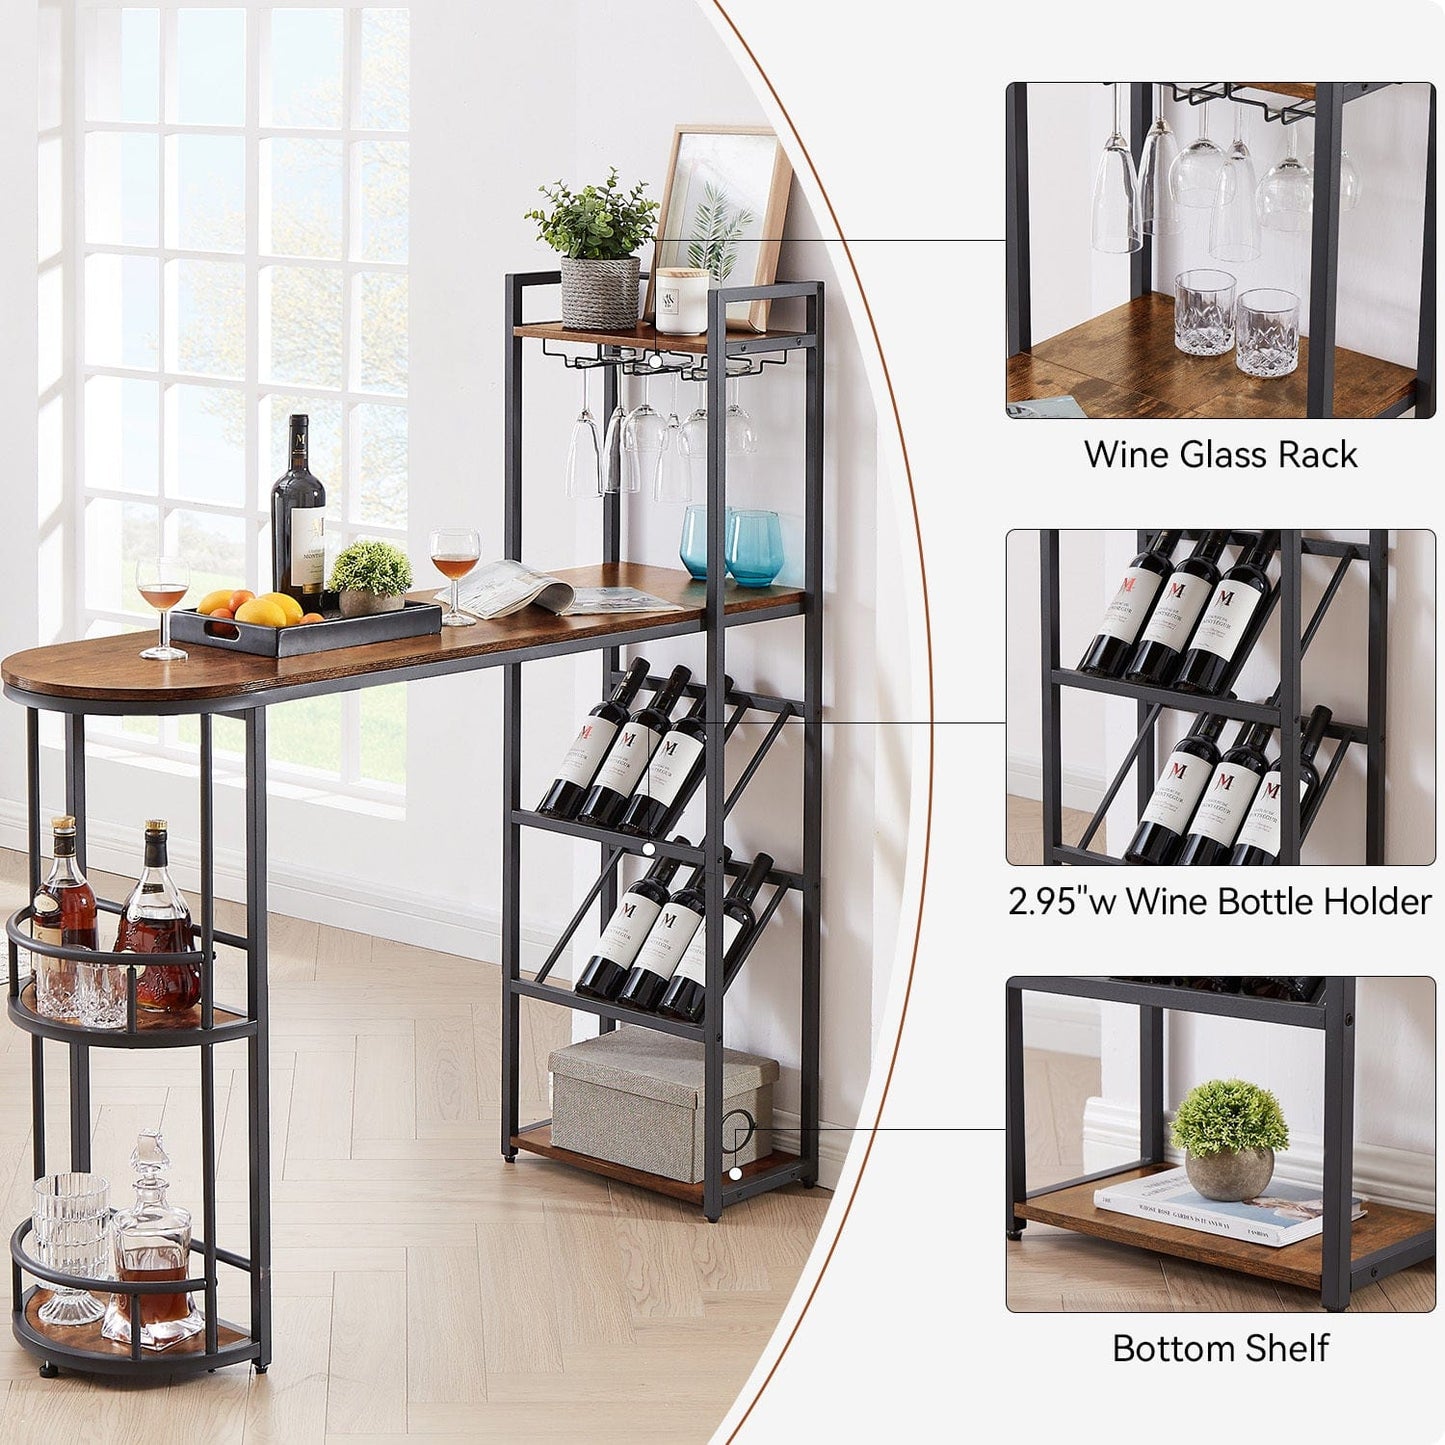 1st Choice Furniture Direct Bar Table 1st Choice Multifunctional High Bar Table with Bottle & Glass Holder